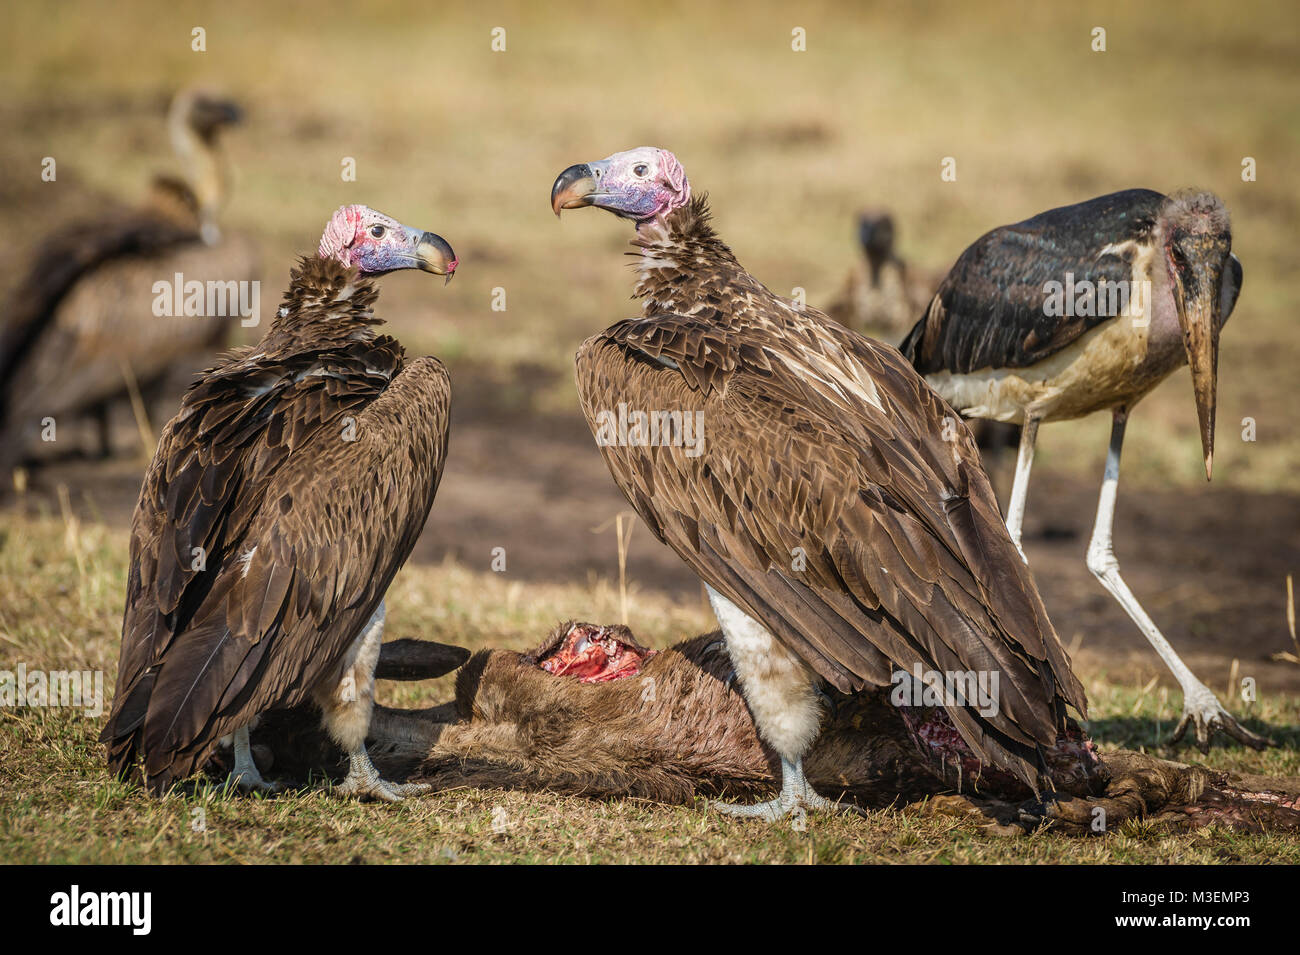 A pair of lappetfaced vultures share the remains of a kill. Stock Photo